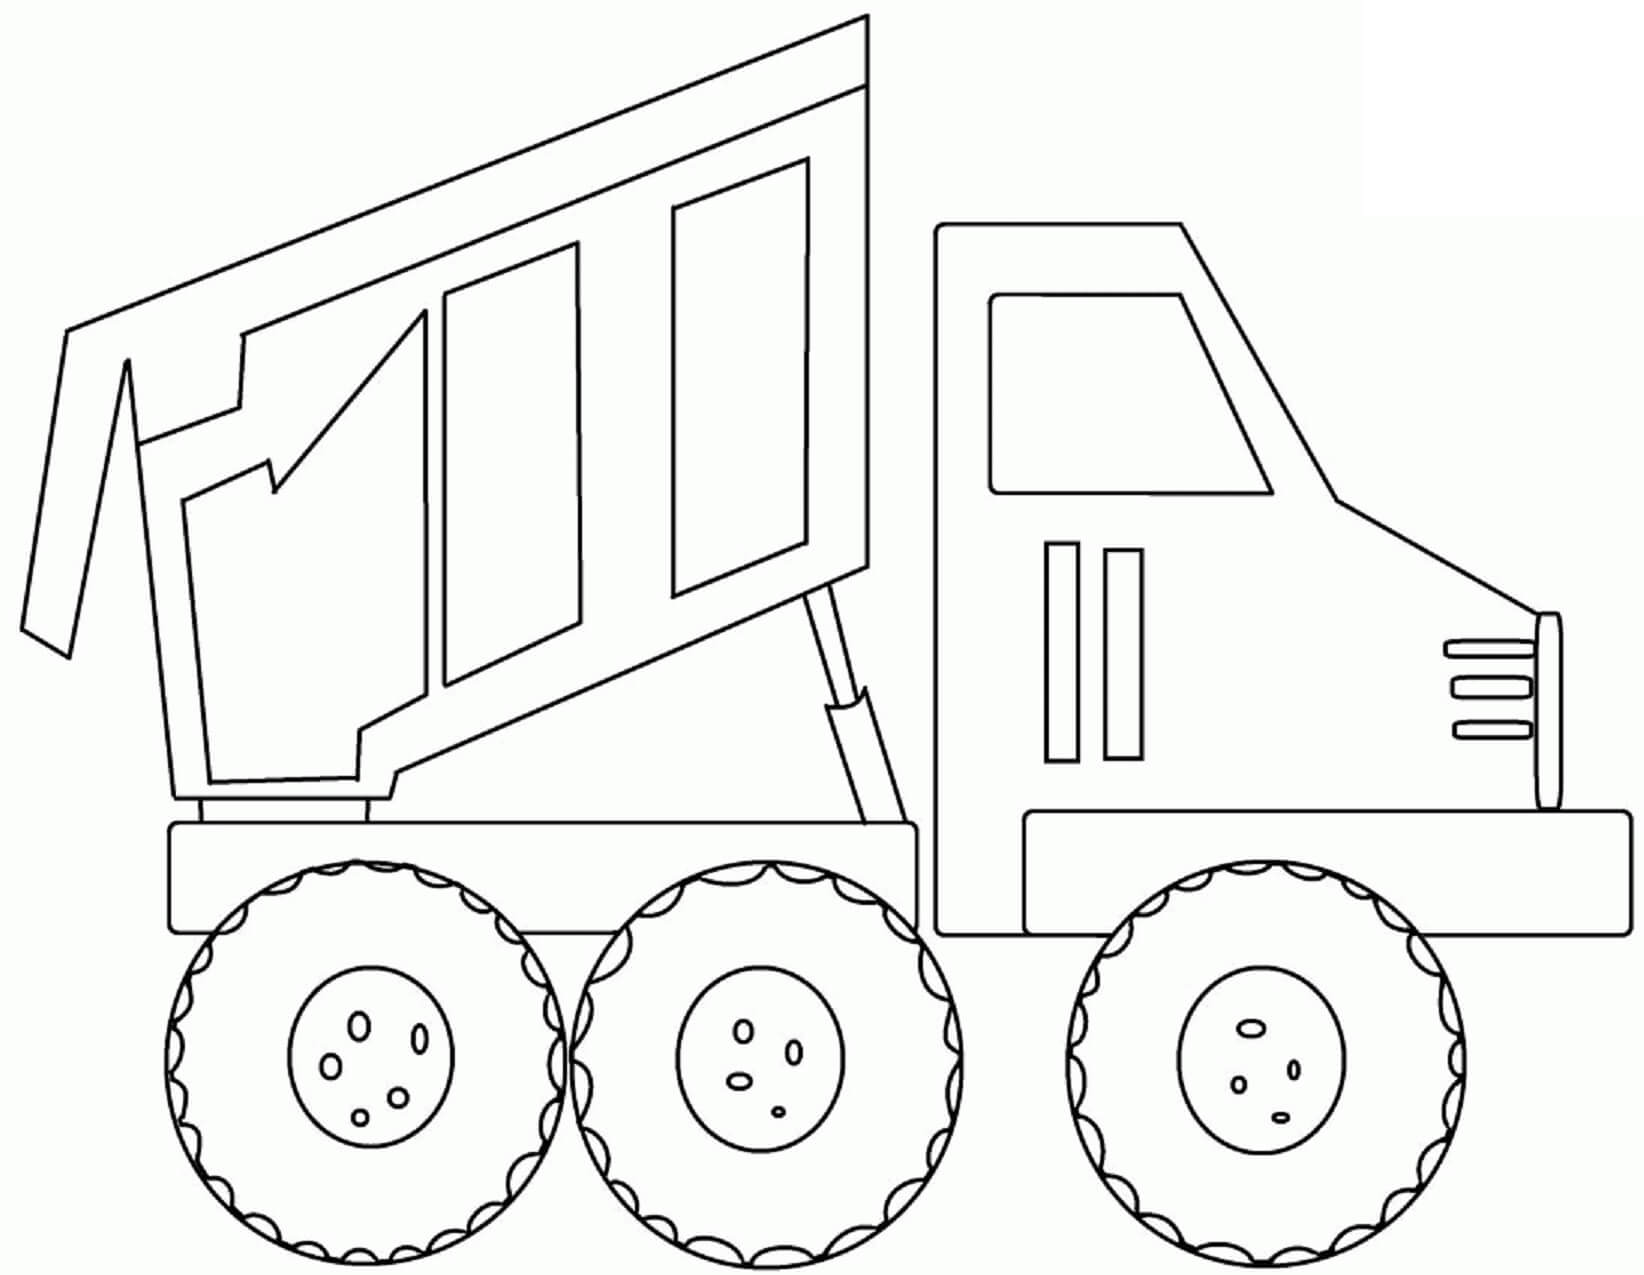 Dump truck free images coloring page